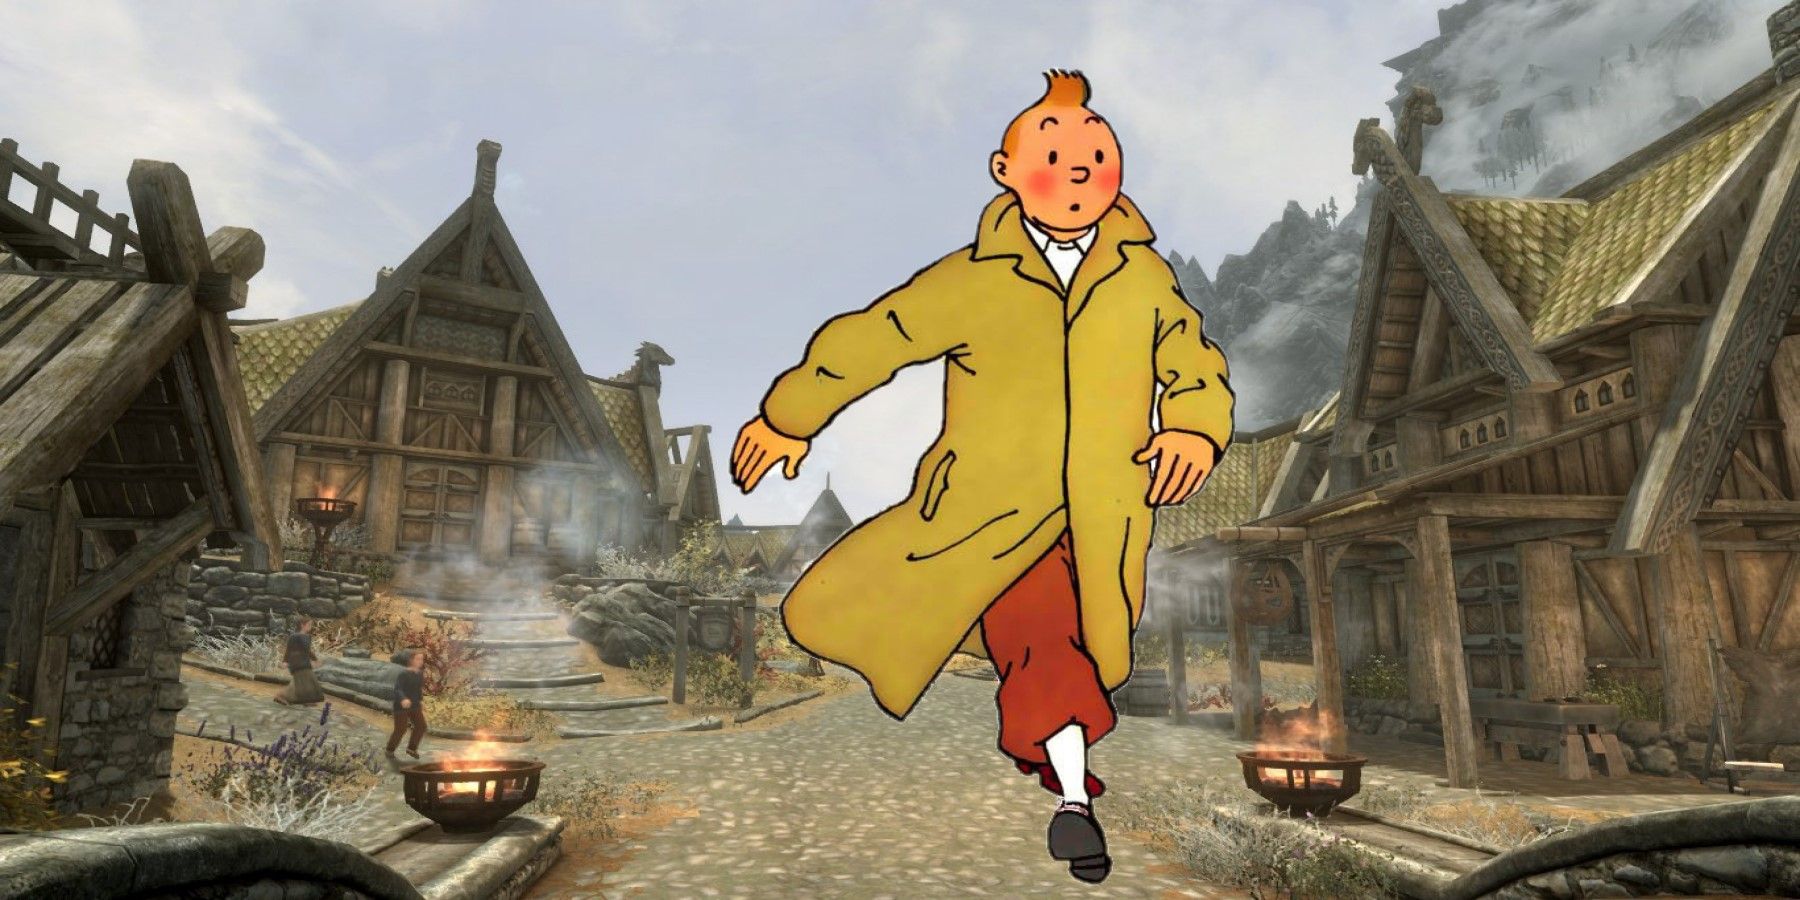 Skyrim Fan Makes Interesting Crossover Art With Tintin